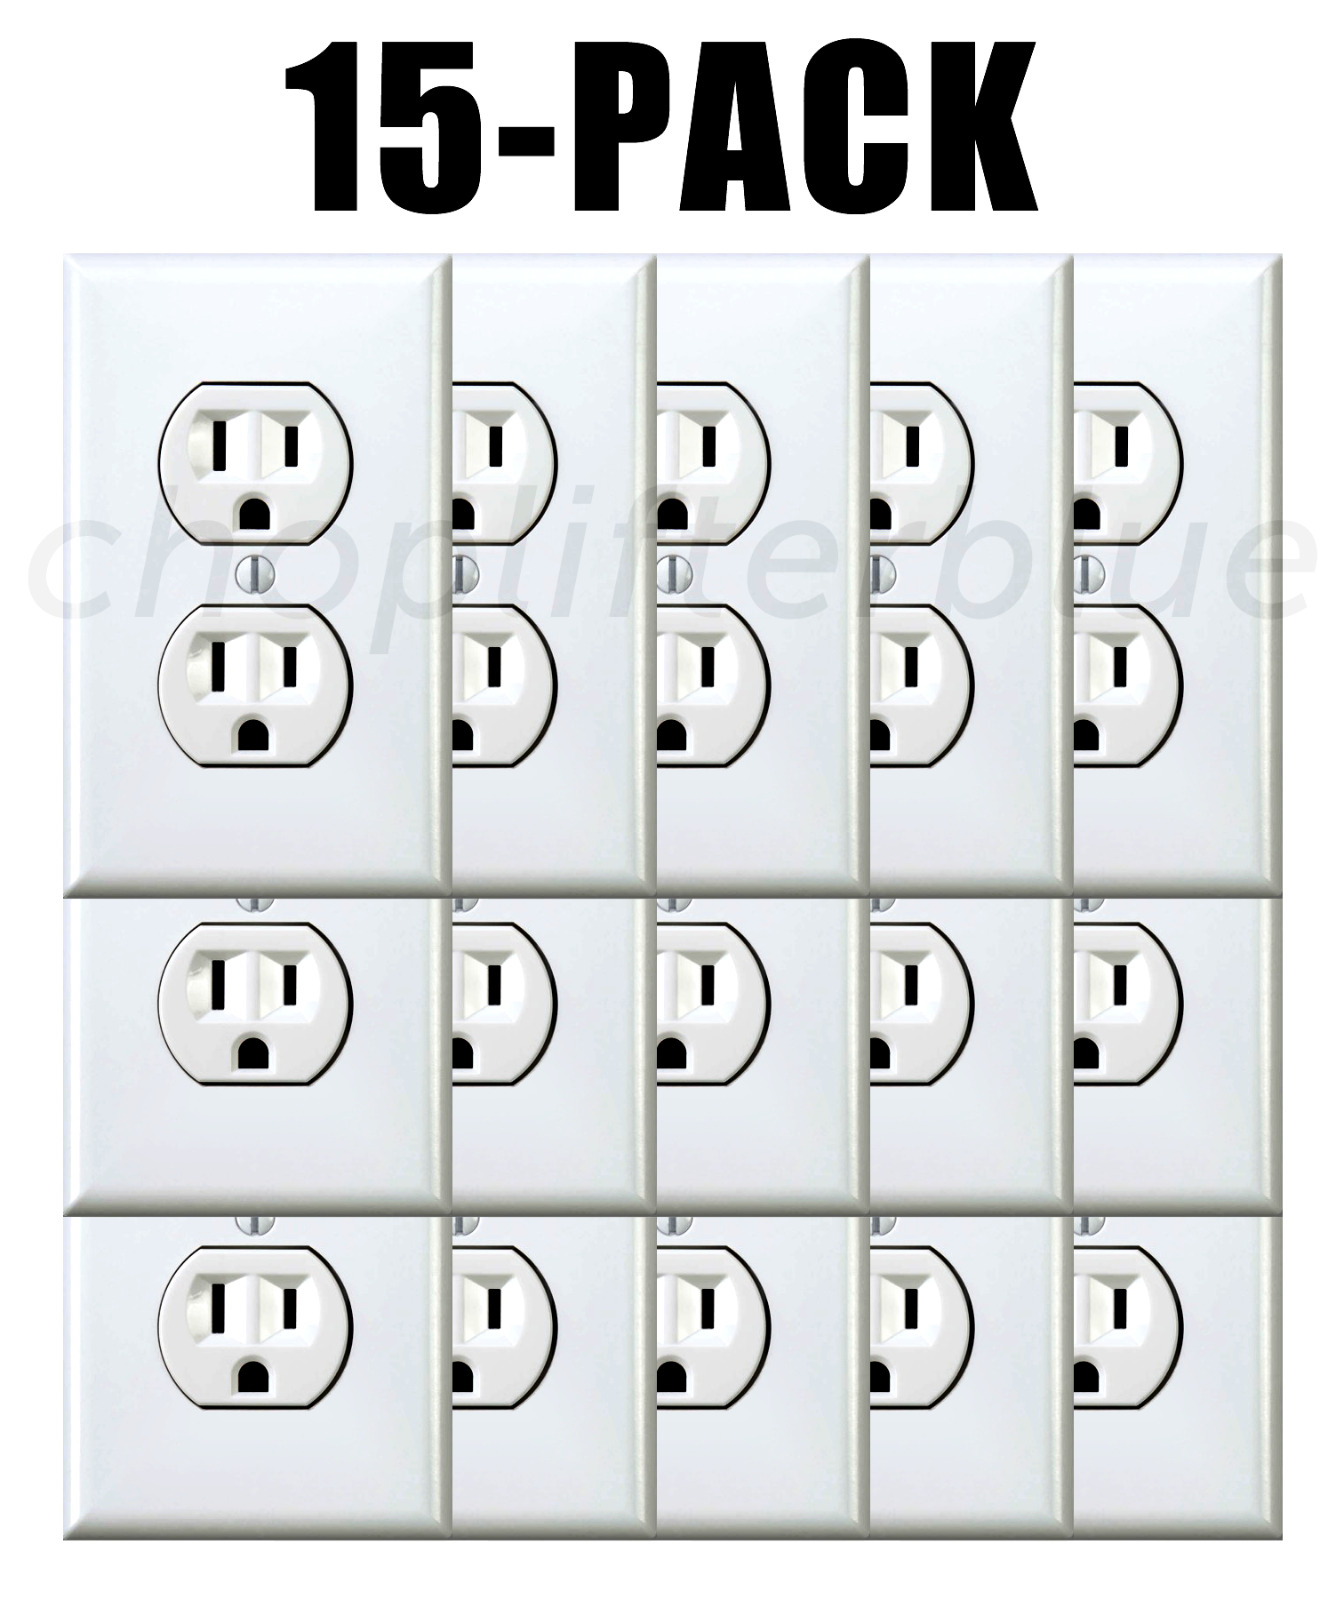 Electrical Outlet Stickers 15-Pack Prank Fake Joke Funny Custom Decal HQ Sticker